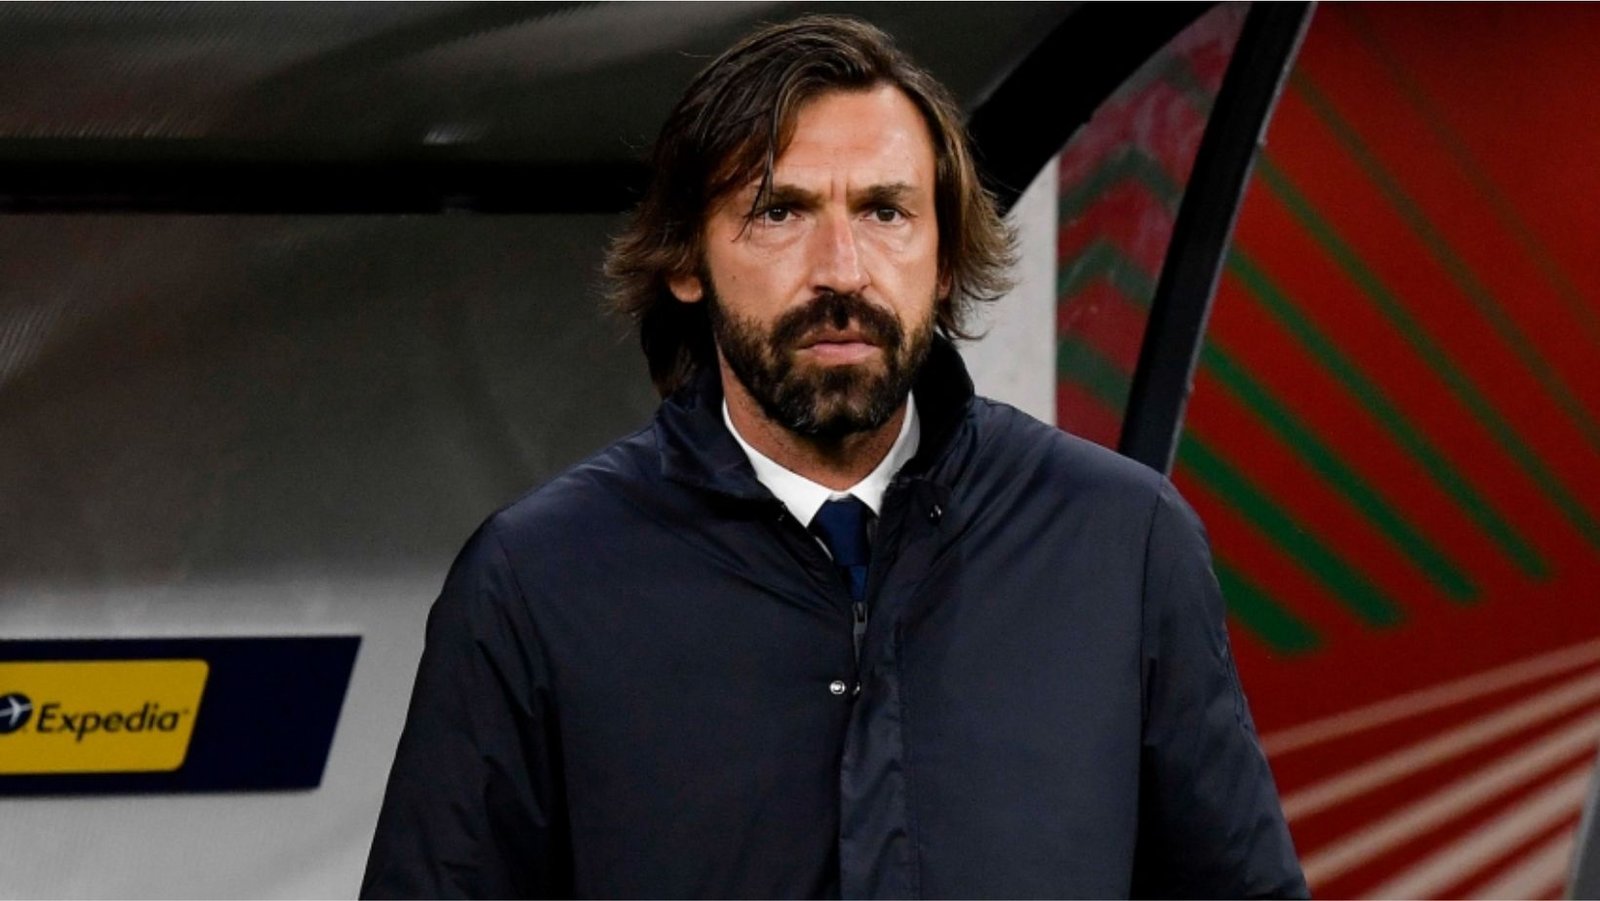 Pirlo is attempting to resurrect his coaching career in Turkey